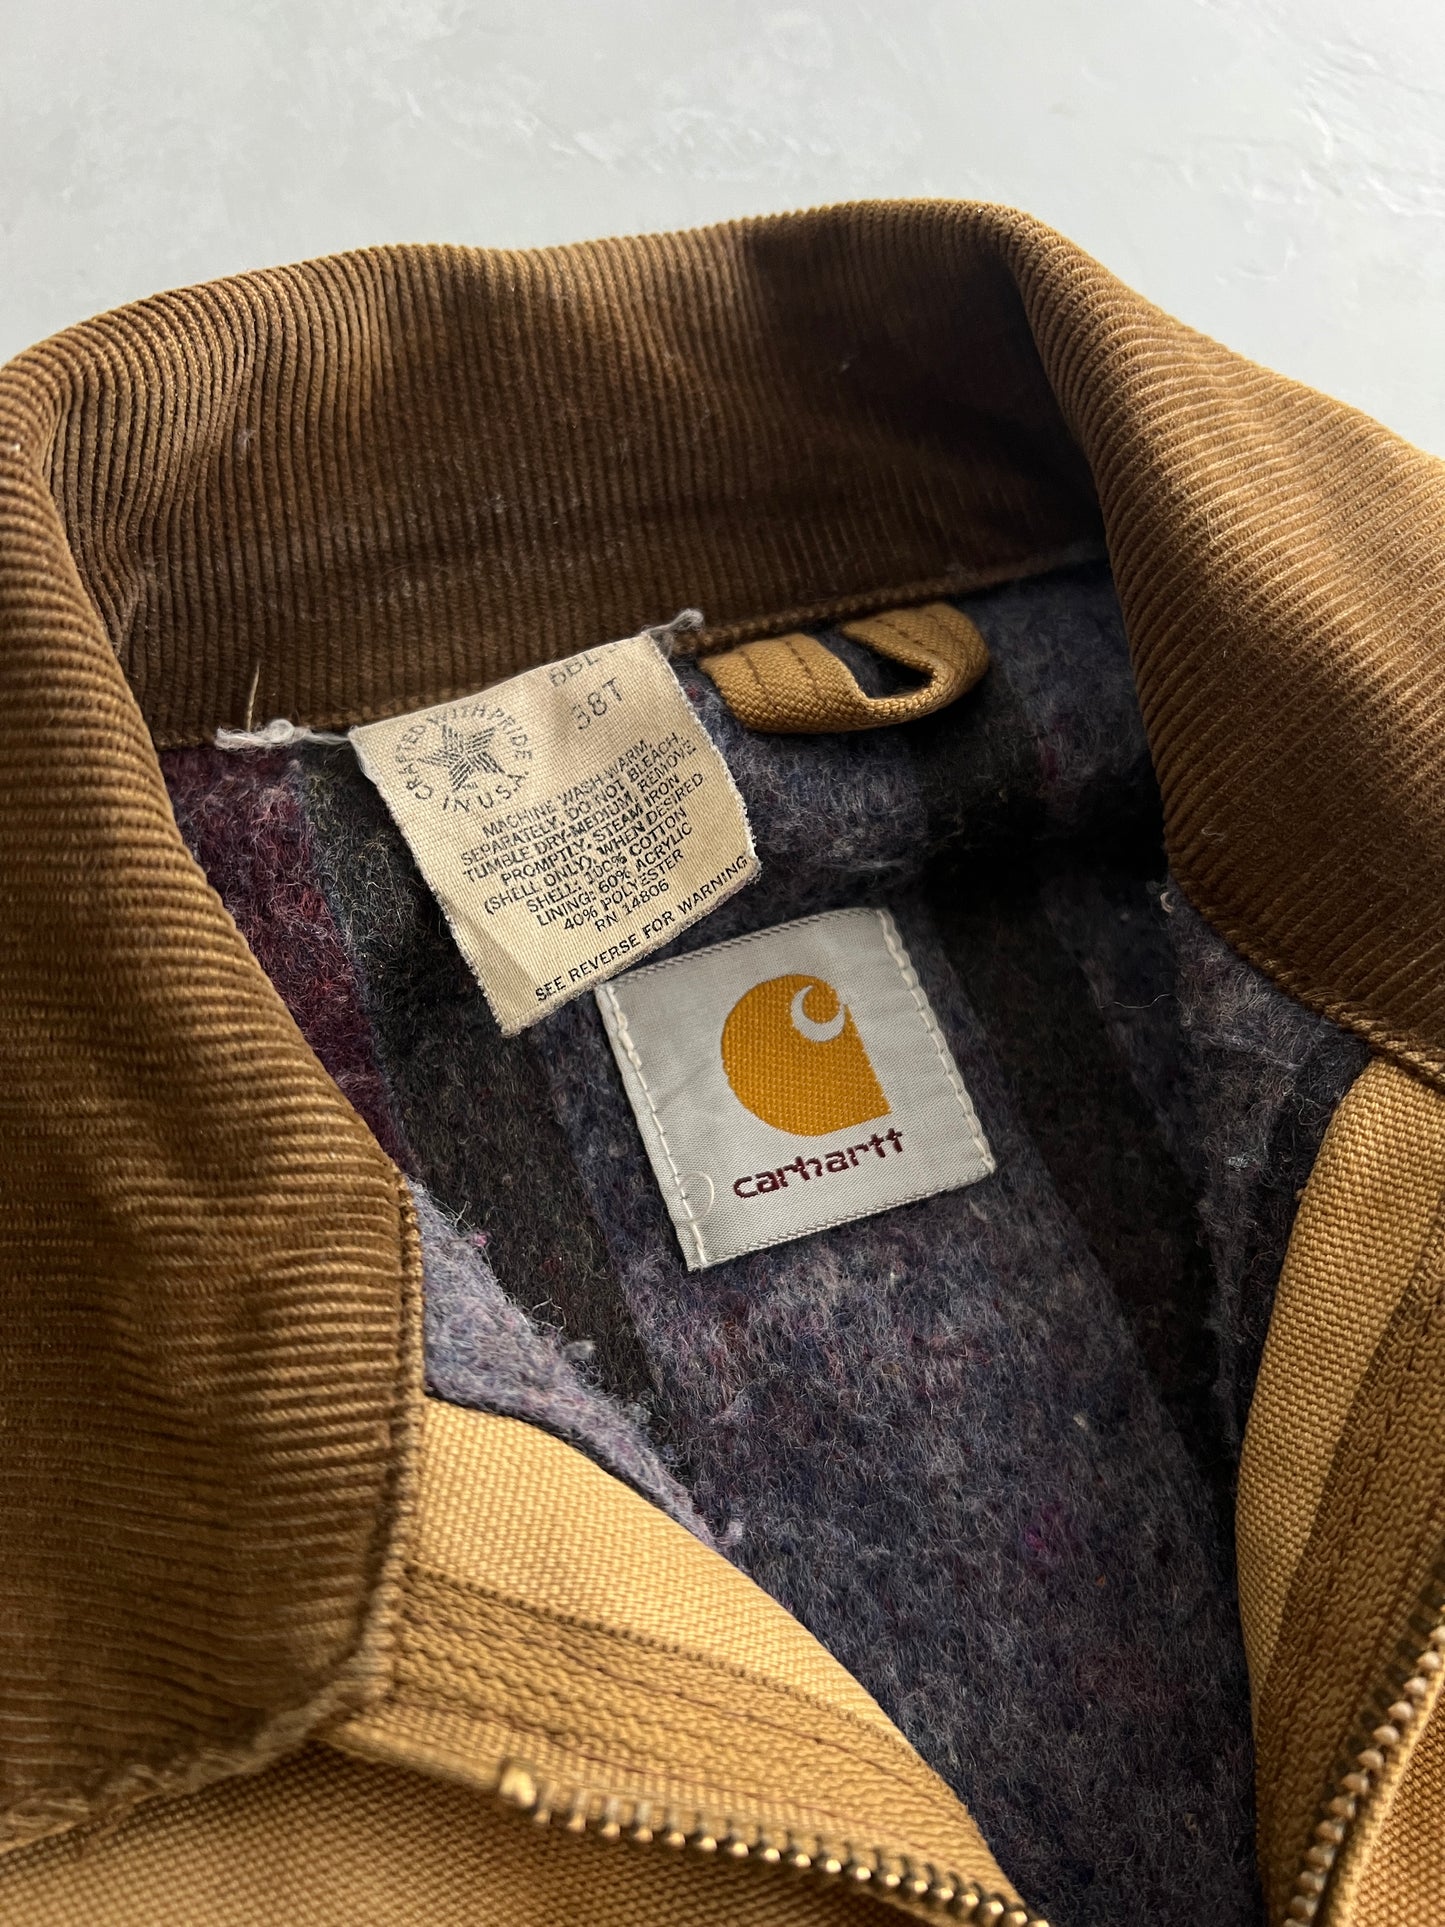 Made in USA Carhartt Detroit Jacket [L]